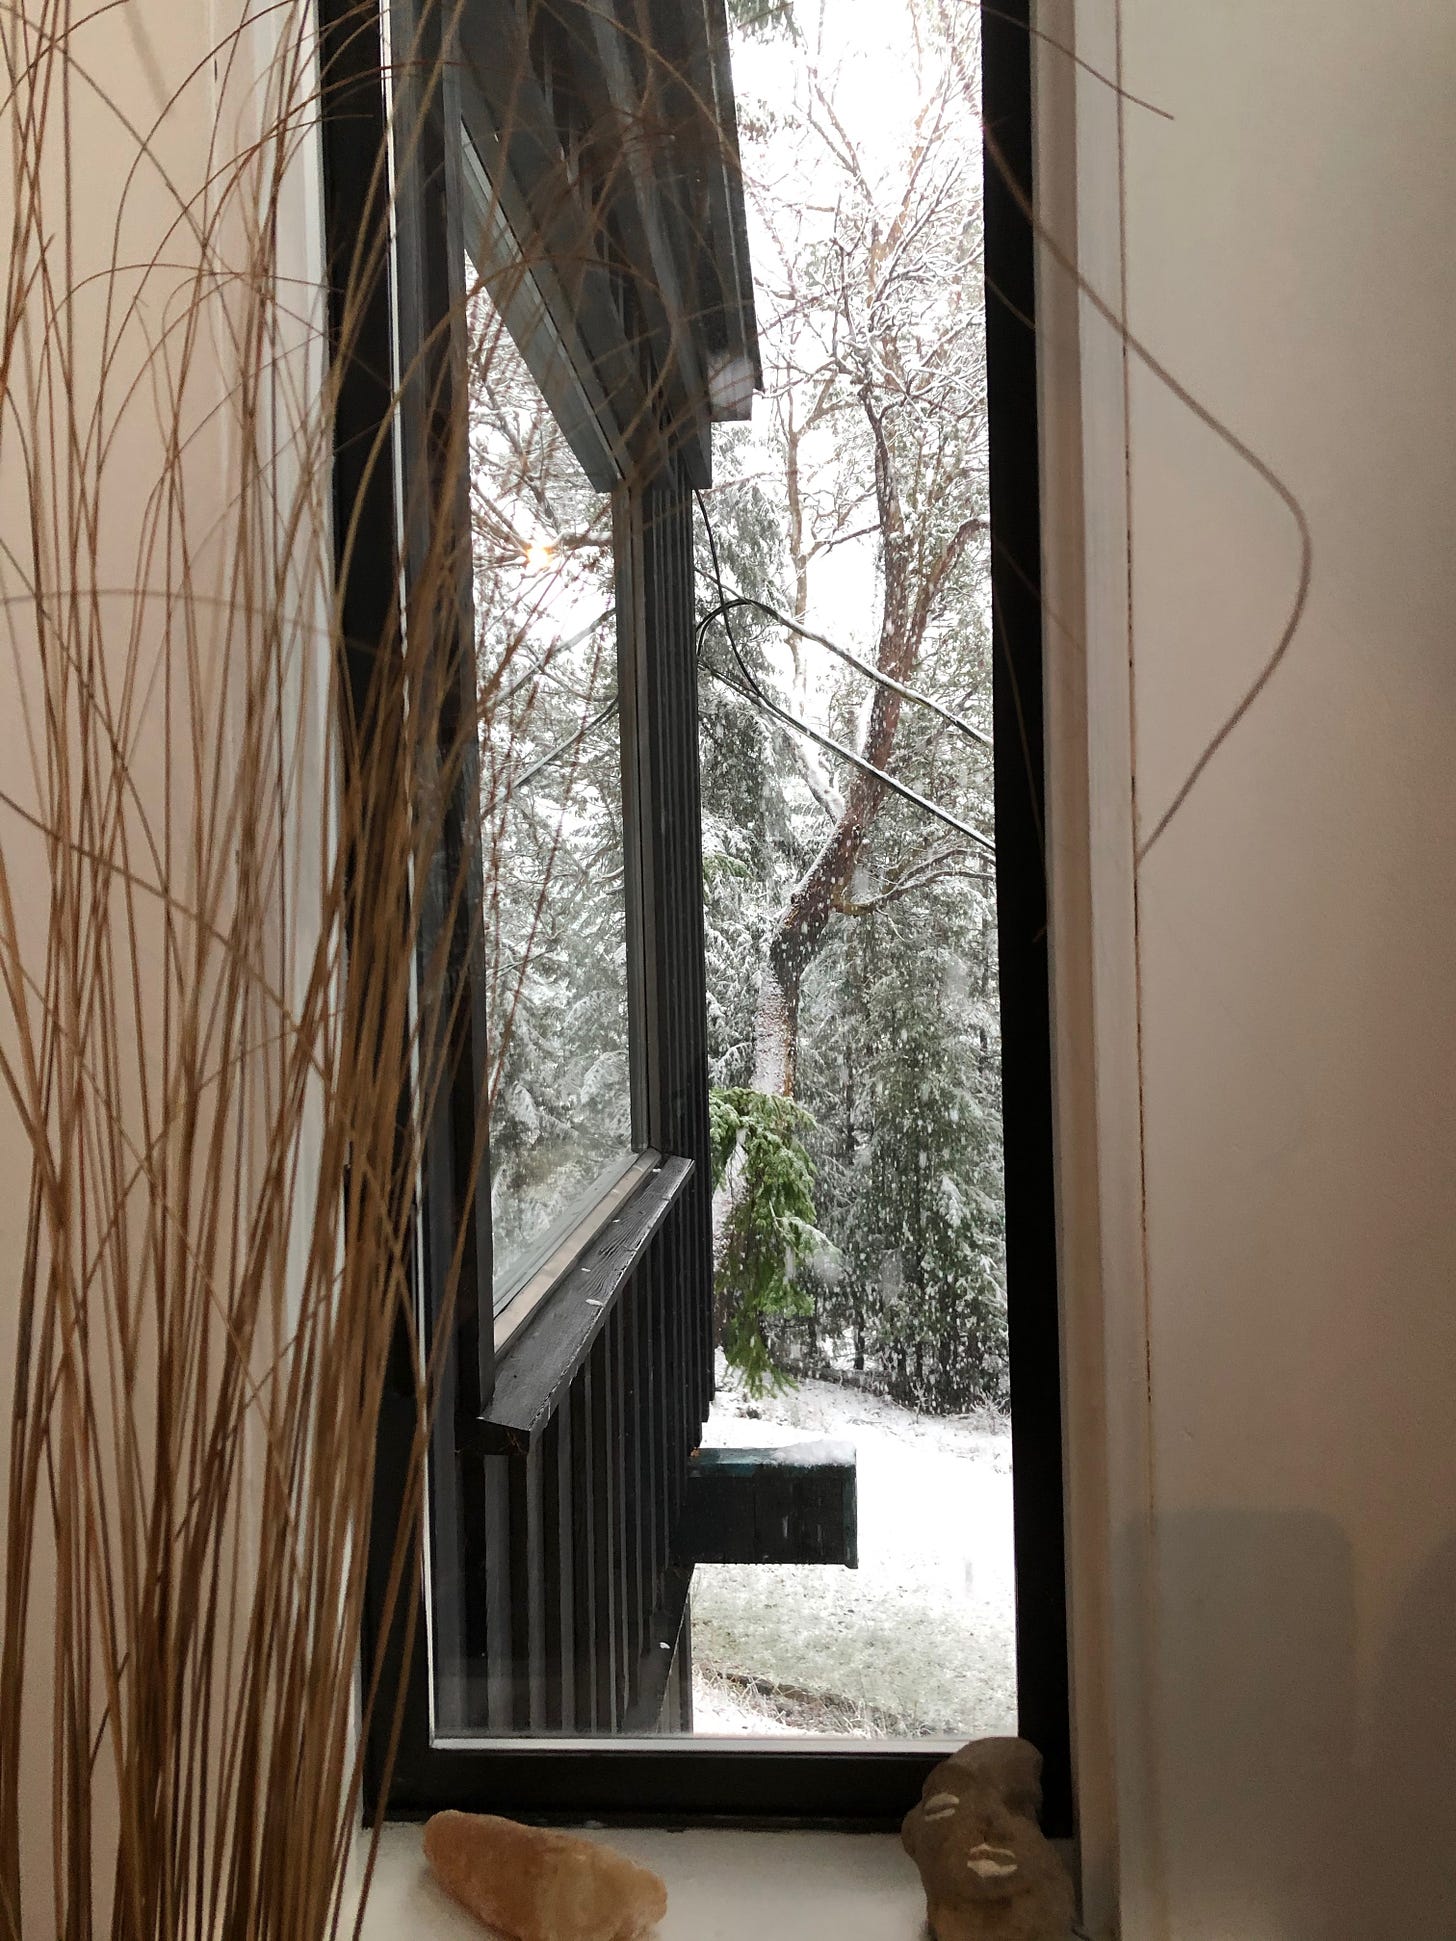 View from indoors toward the snowy trees